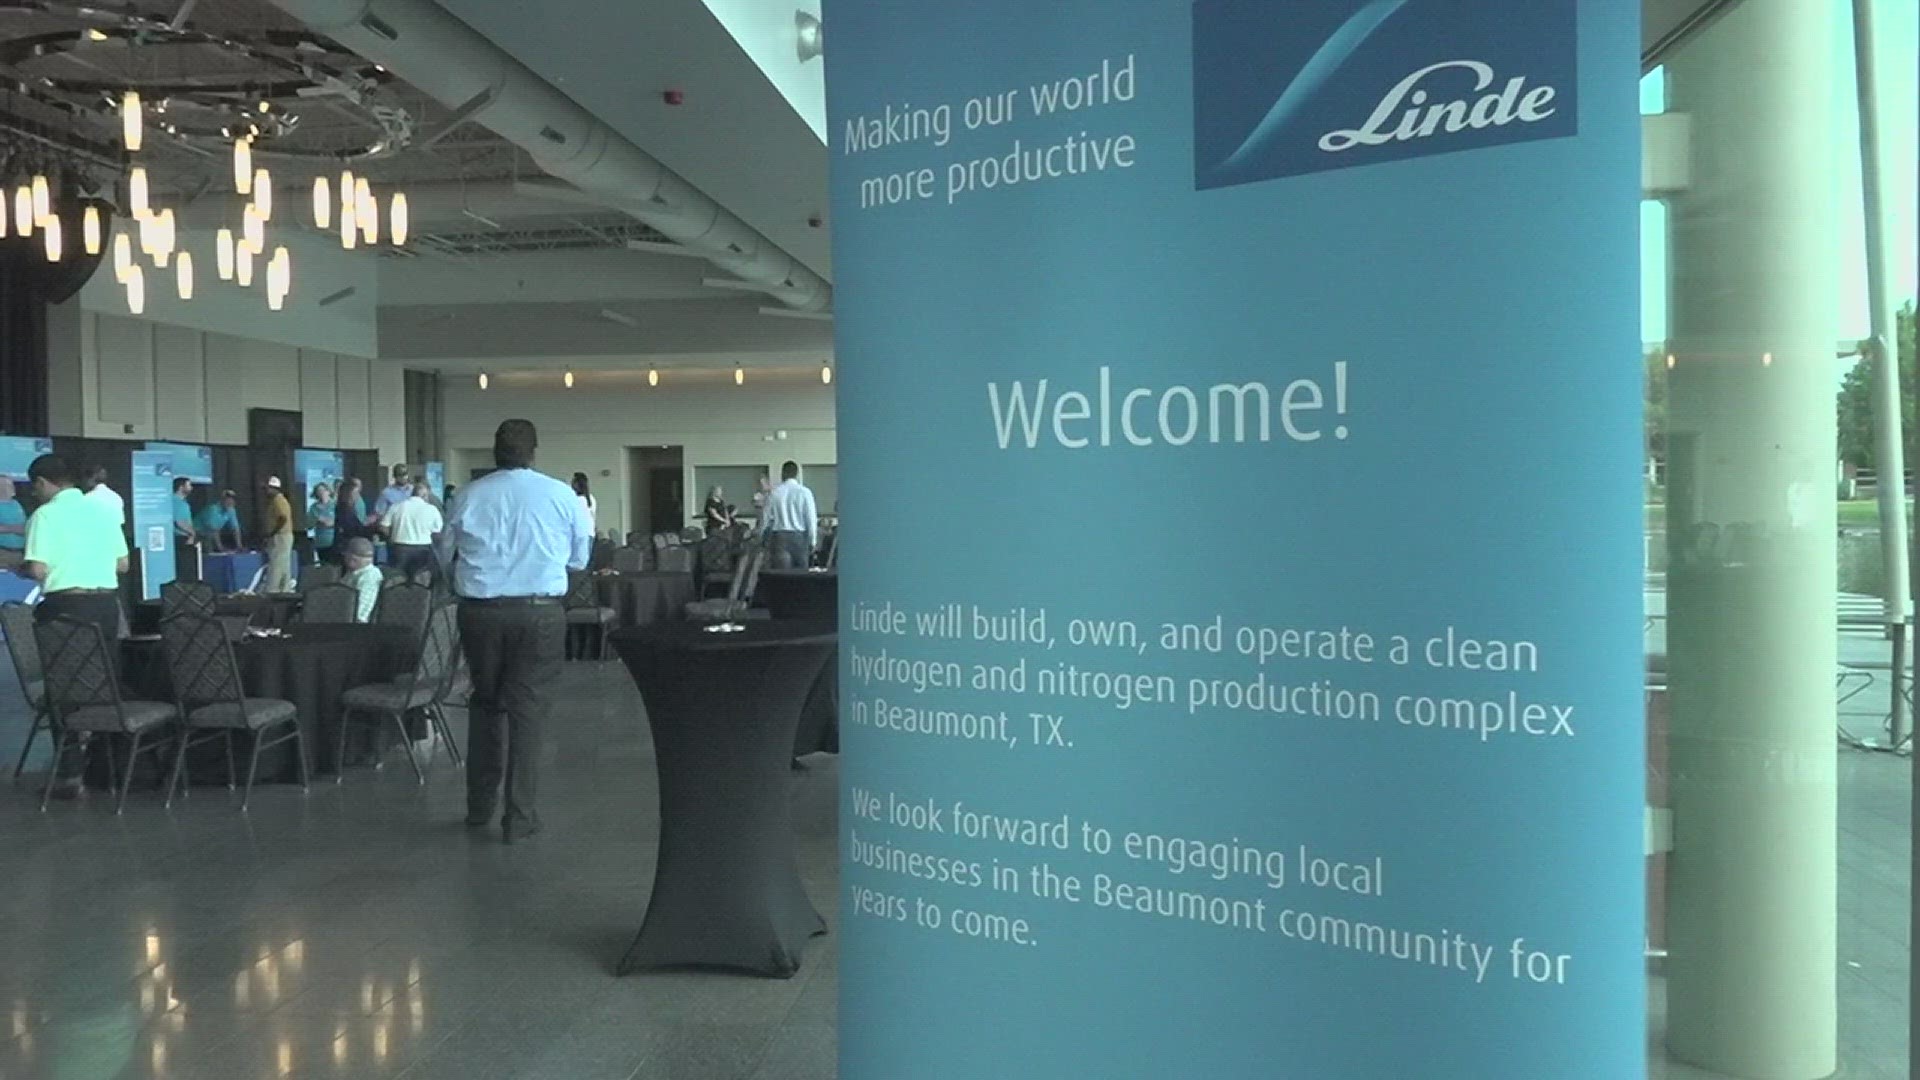 The job fair hosted by Linde Thursday allowed Southeast Texas-based companies to explain why they are the best fit to support the company's needs.